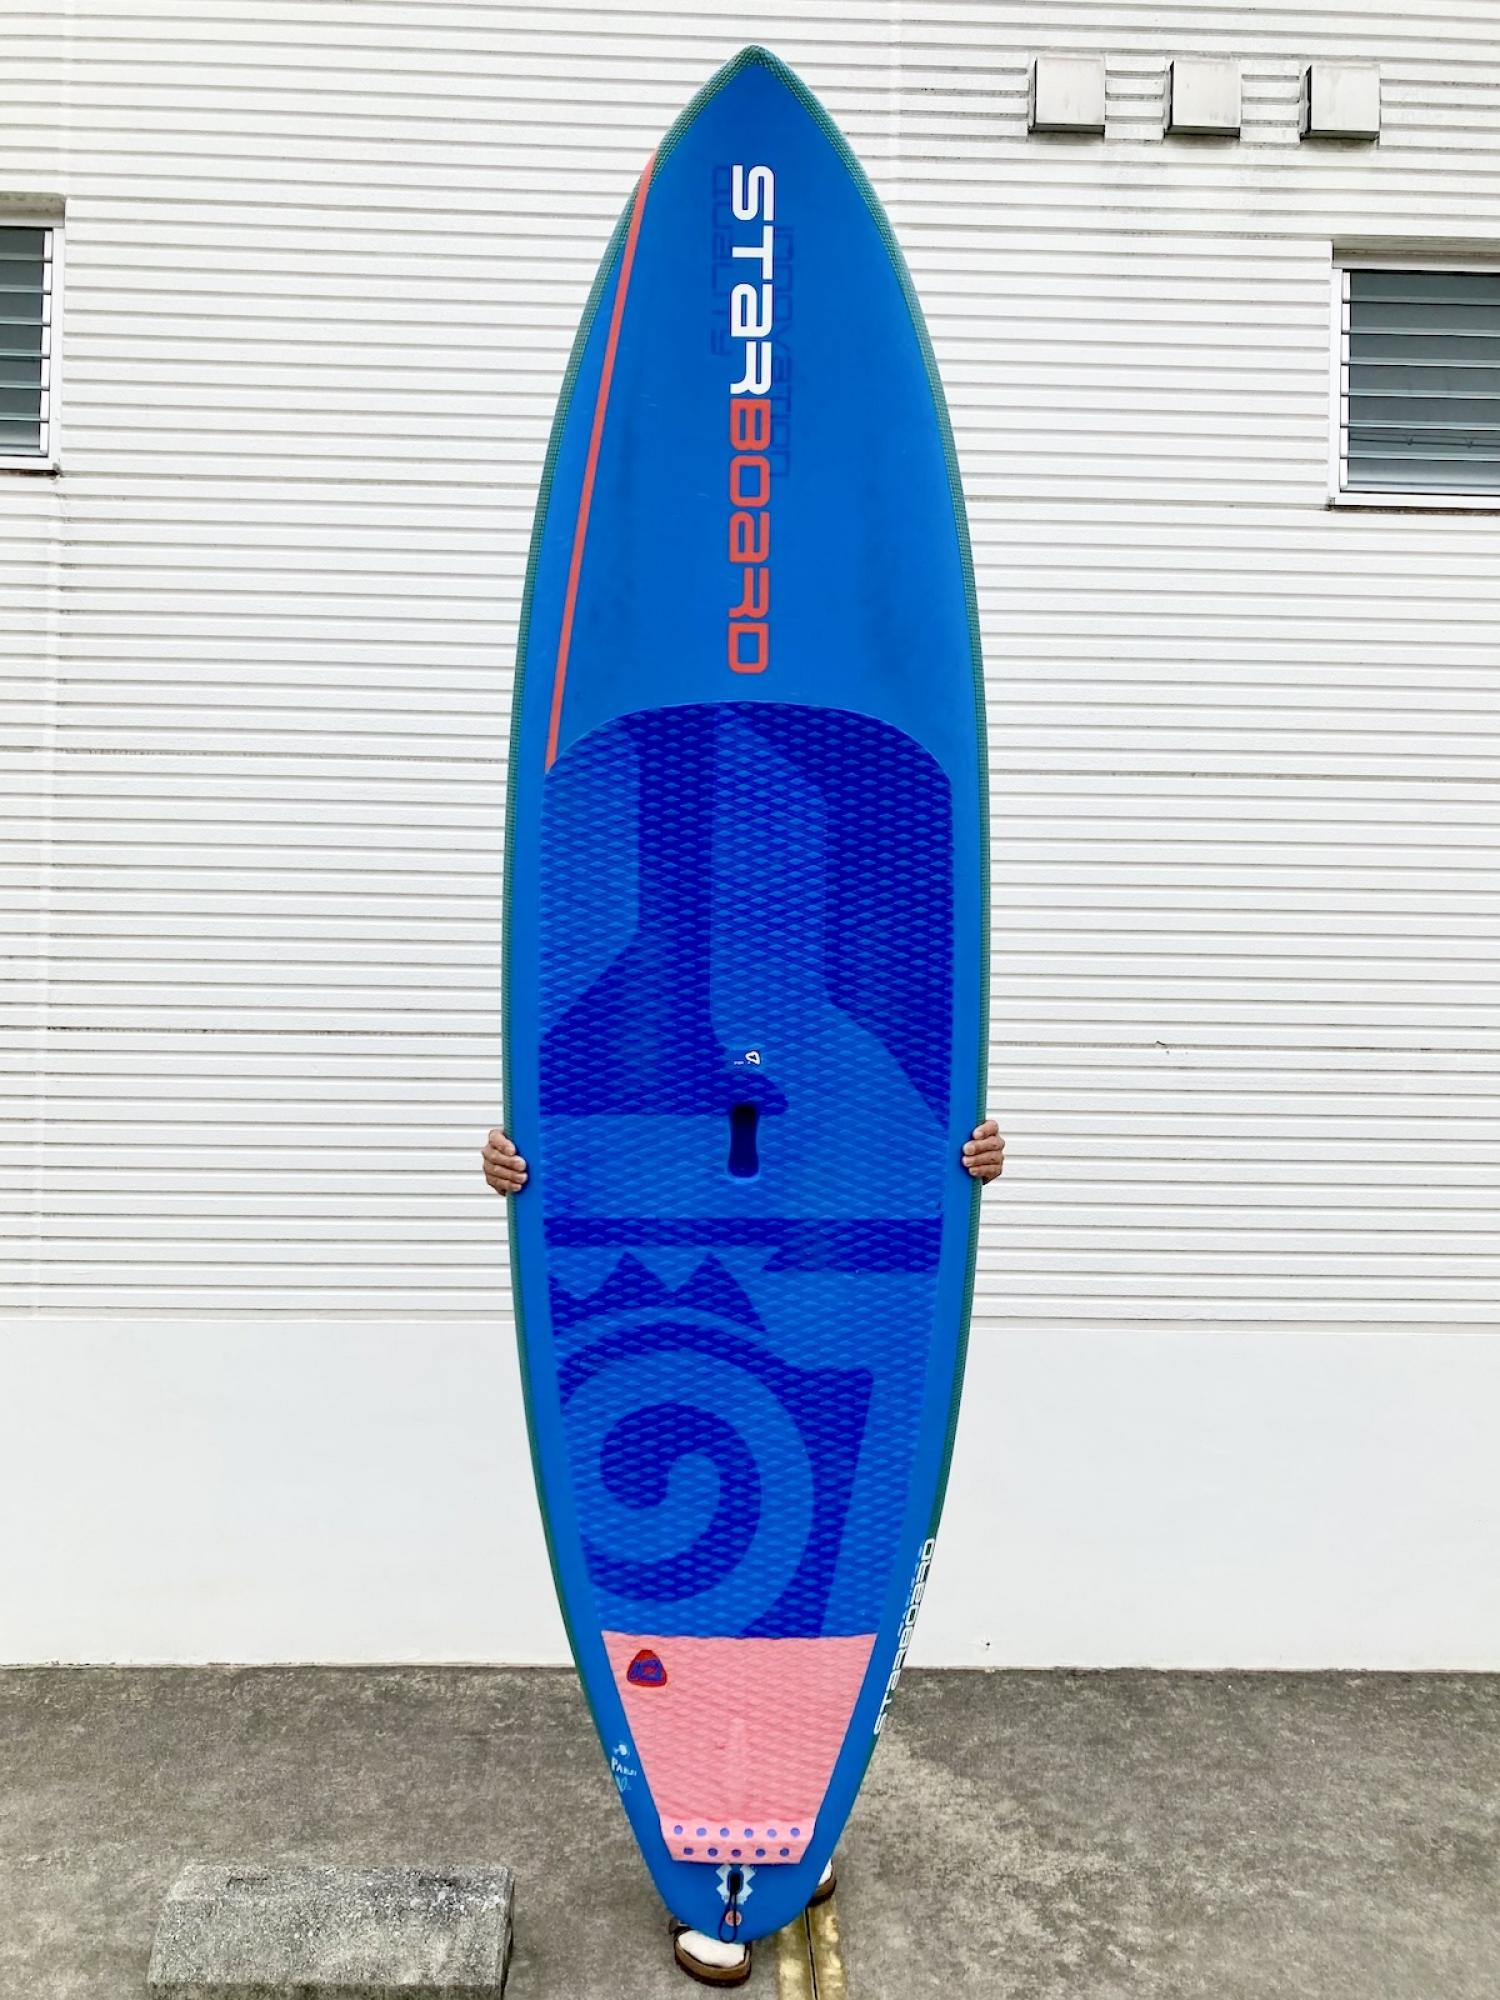 USED SUP BOARDS (STARBOARDS PRO 9.0 XL STAR LITE )